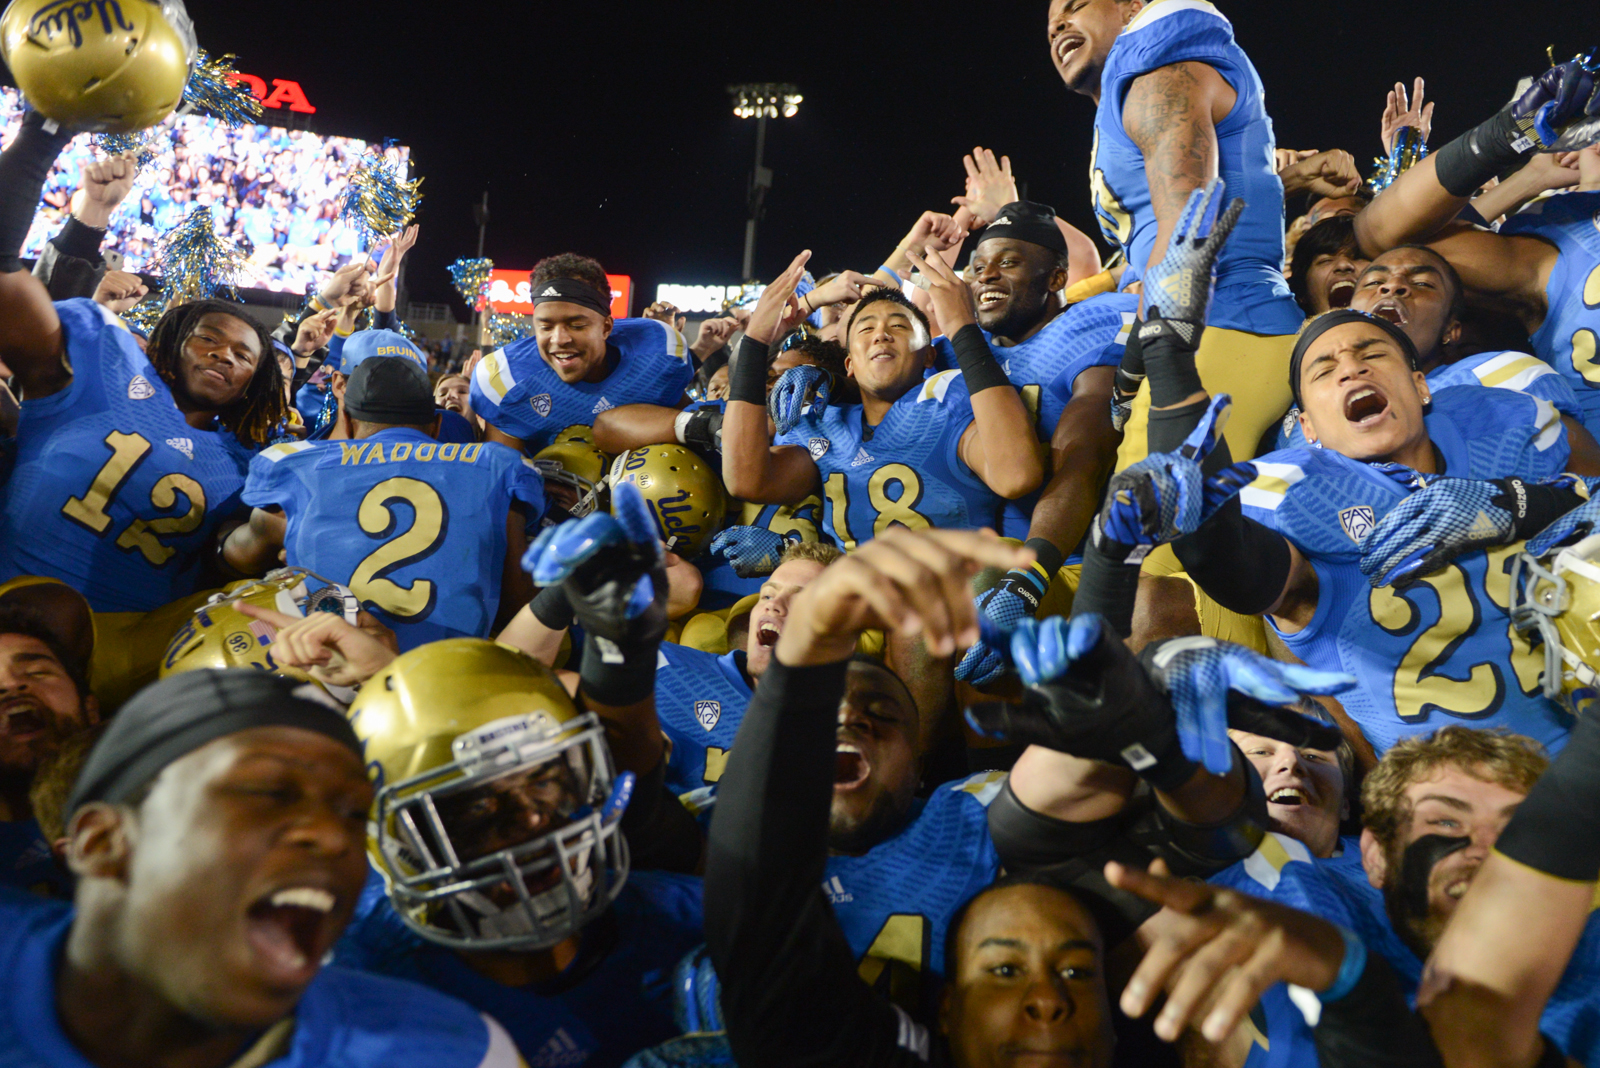 Third straight win over USC brings UCLA closer to goal of Pac12 title